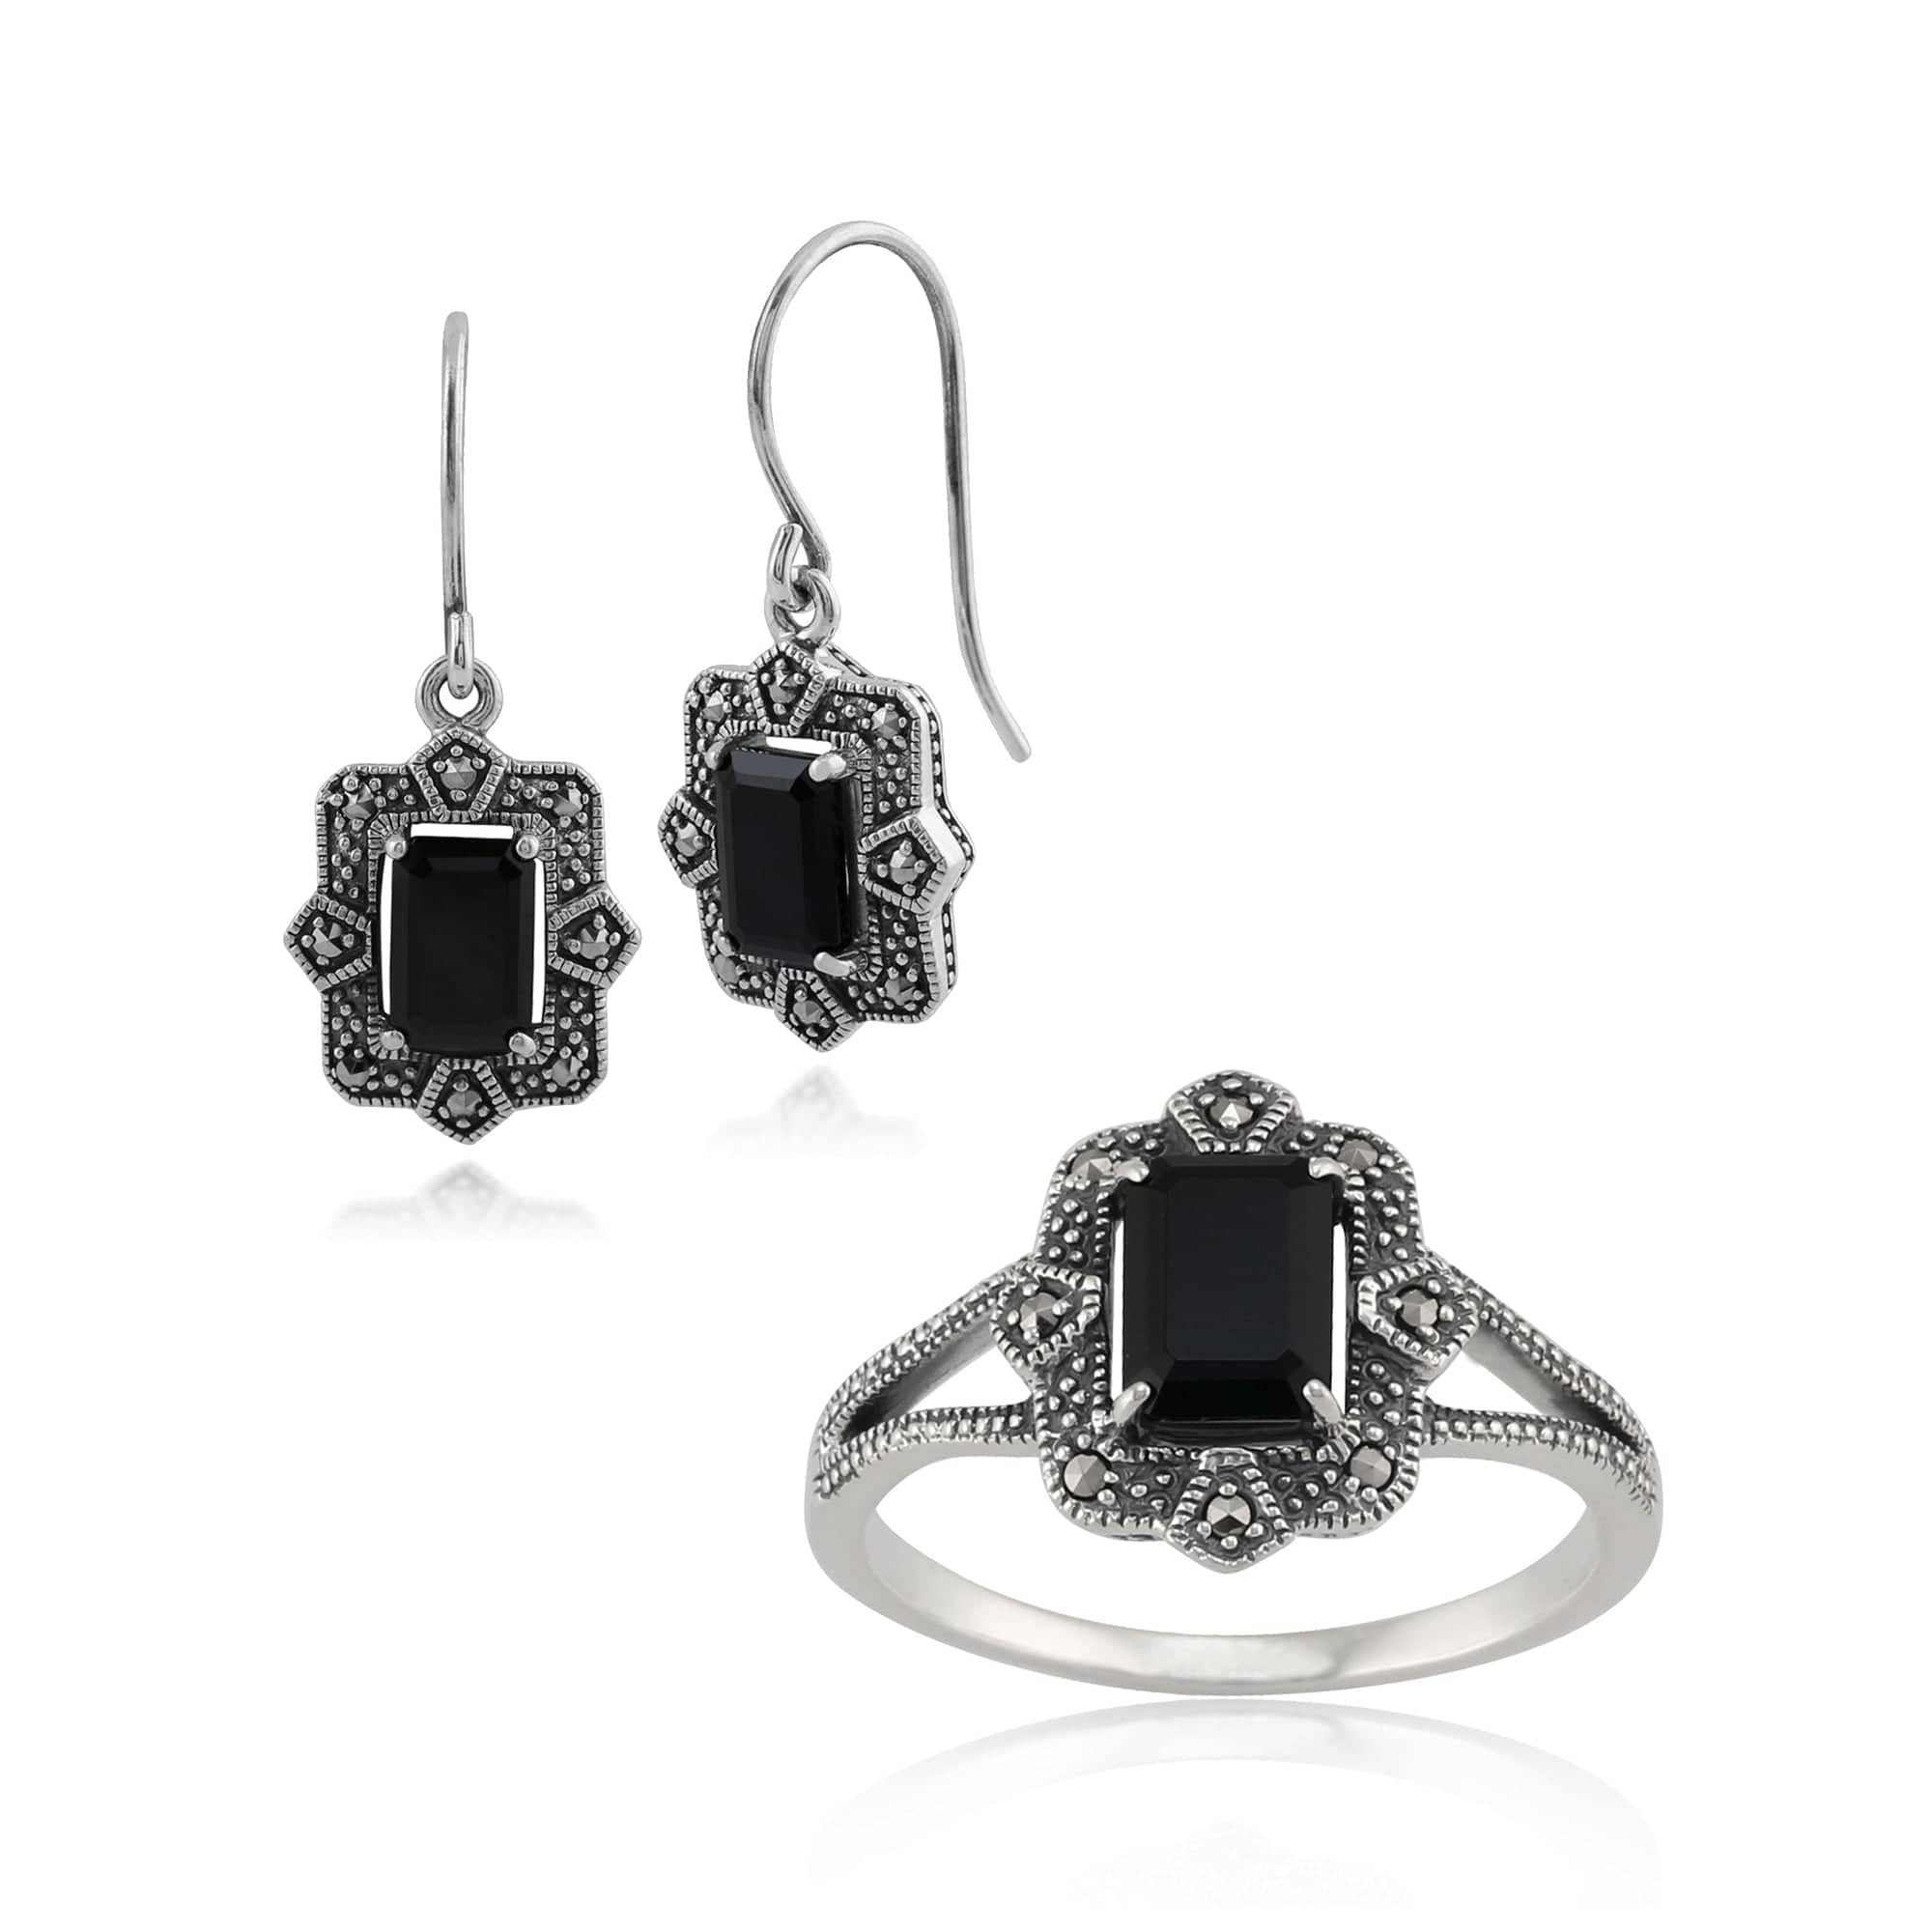 214E850301925-214R479001925 Art Deco Style Black Spinel & Marcasite Earrings & Ring Set In Silver 1